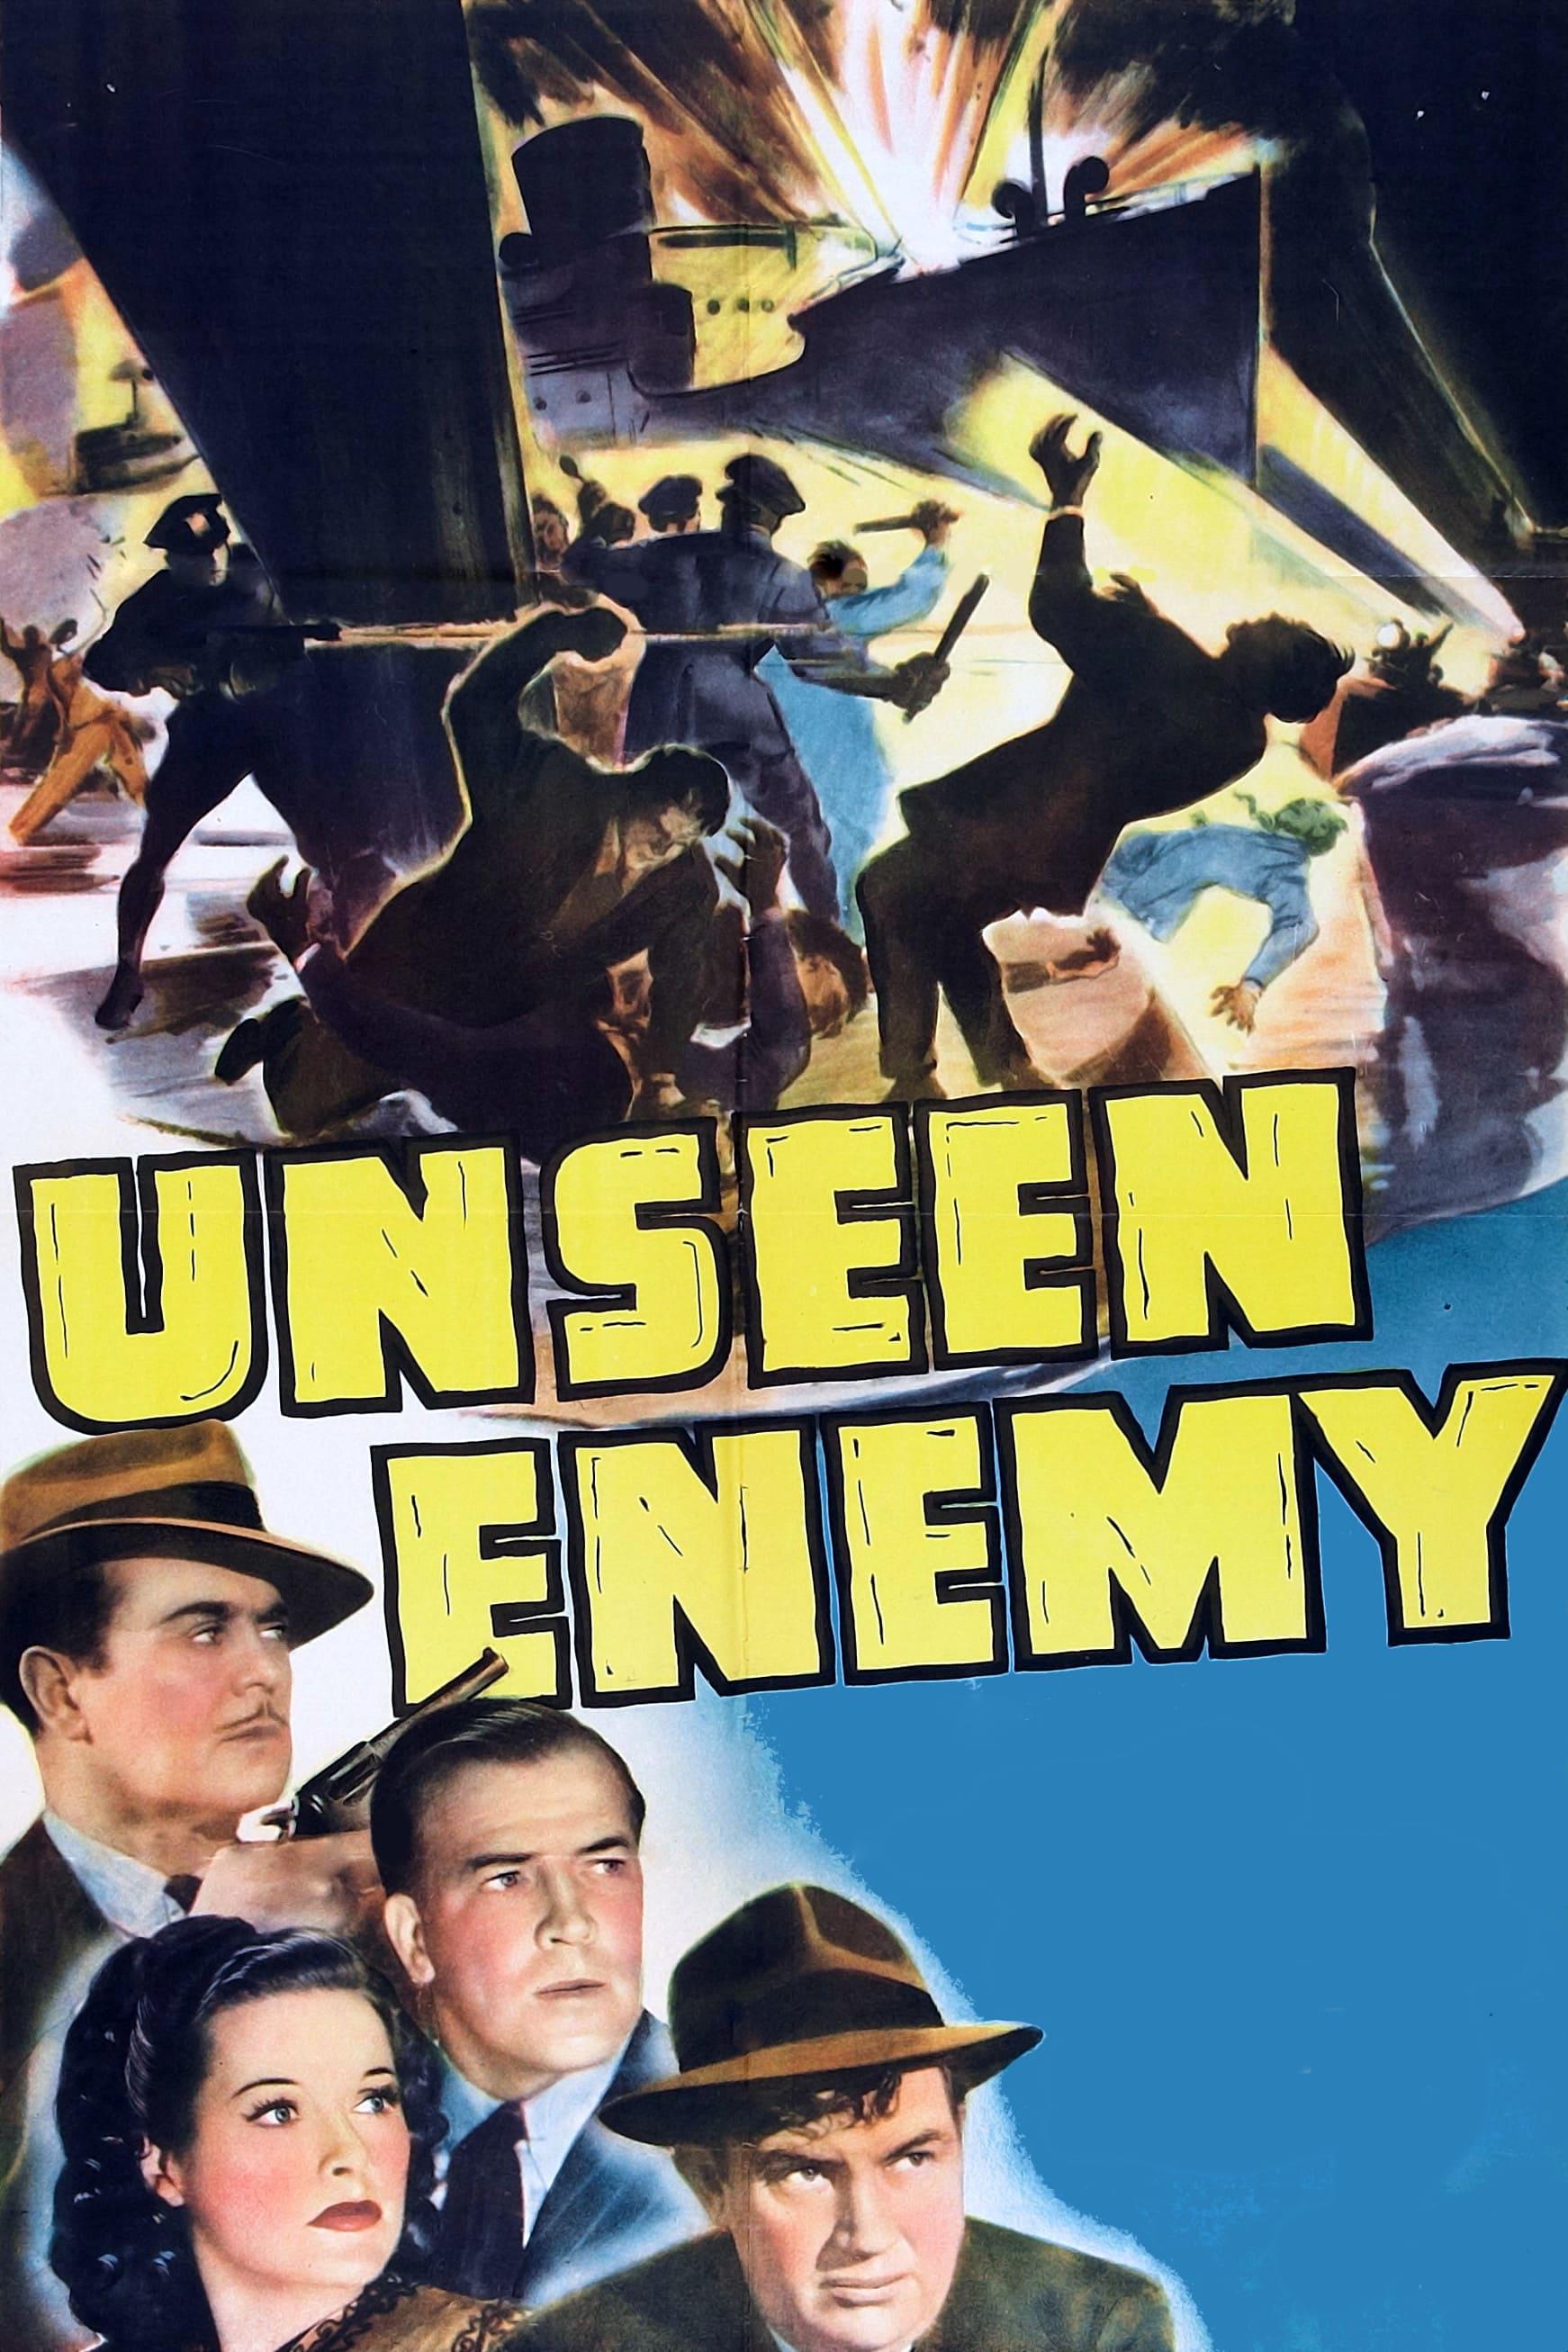 Unseen Enemy poster